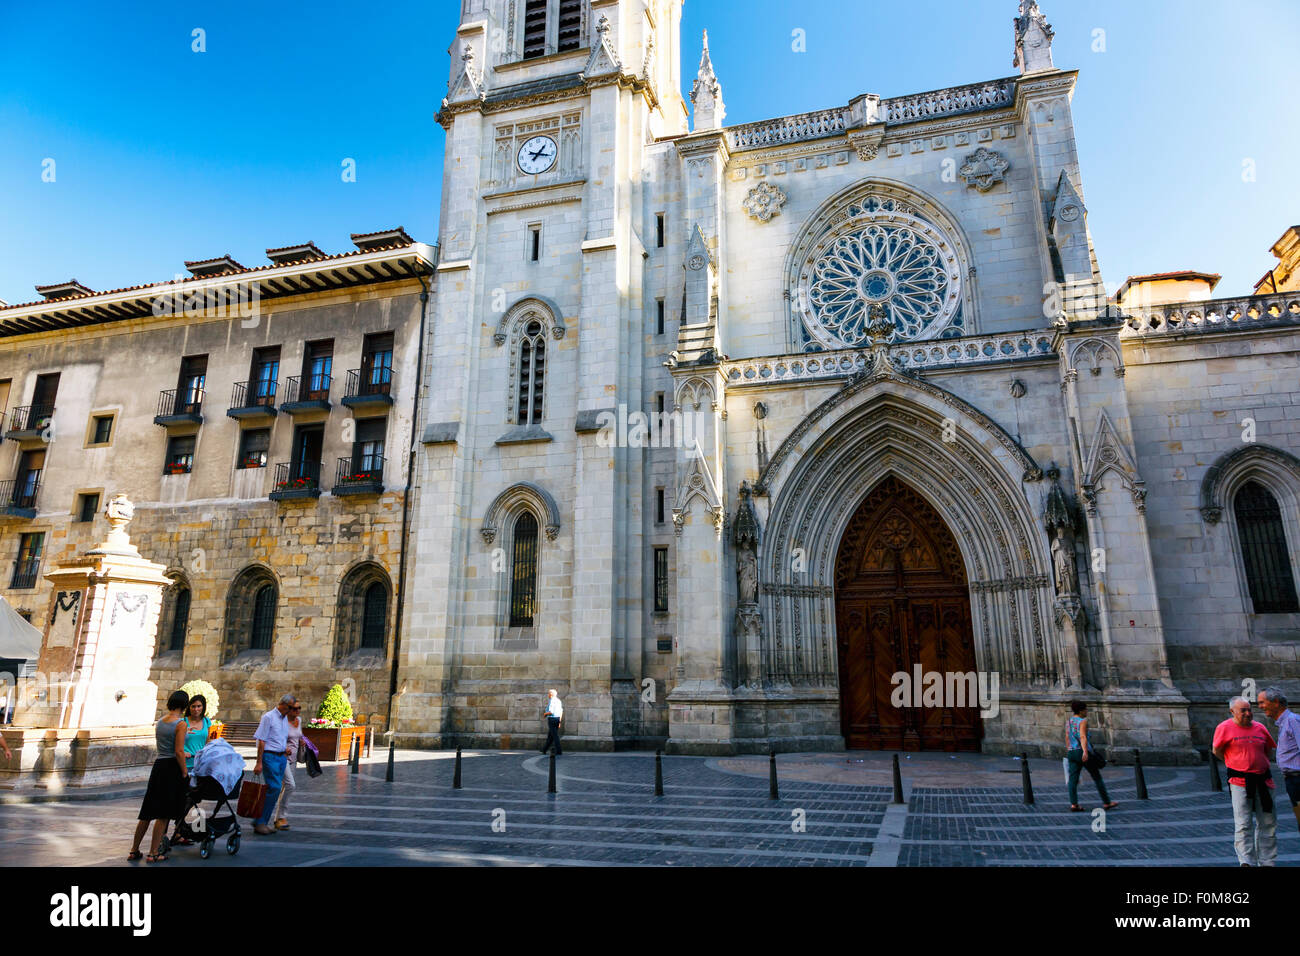 Santiago Cathedral. Bilbao, Biscay, Spain, Europe. Stock Photo